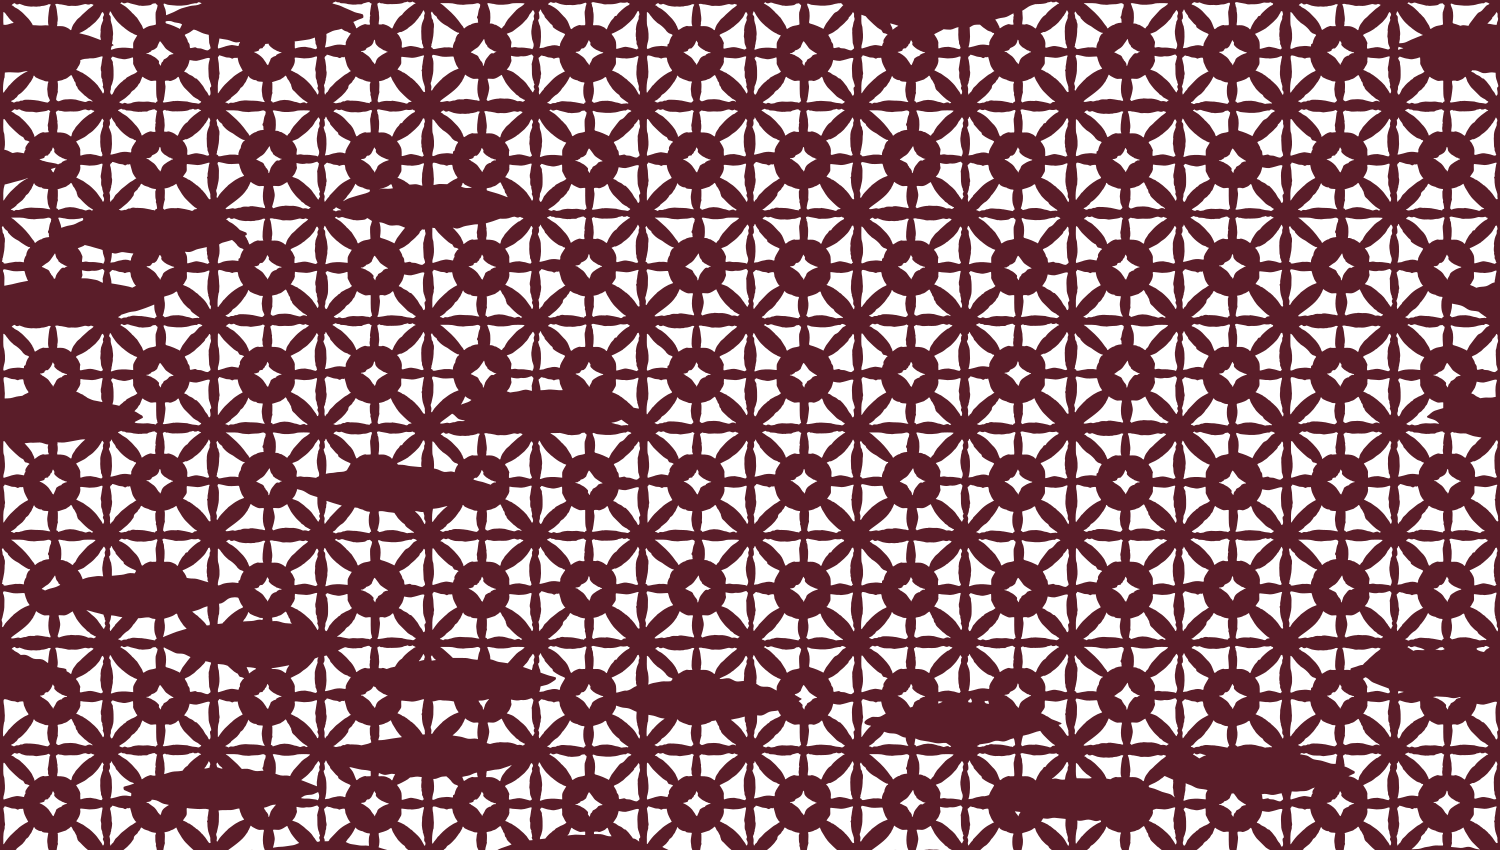 Parasoleil™ Balambra© pattern displayed with a burgundy color overlay